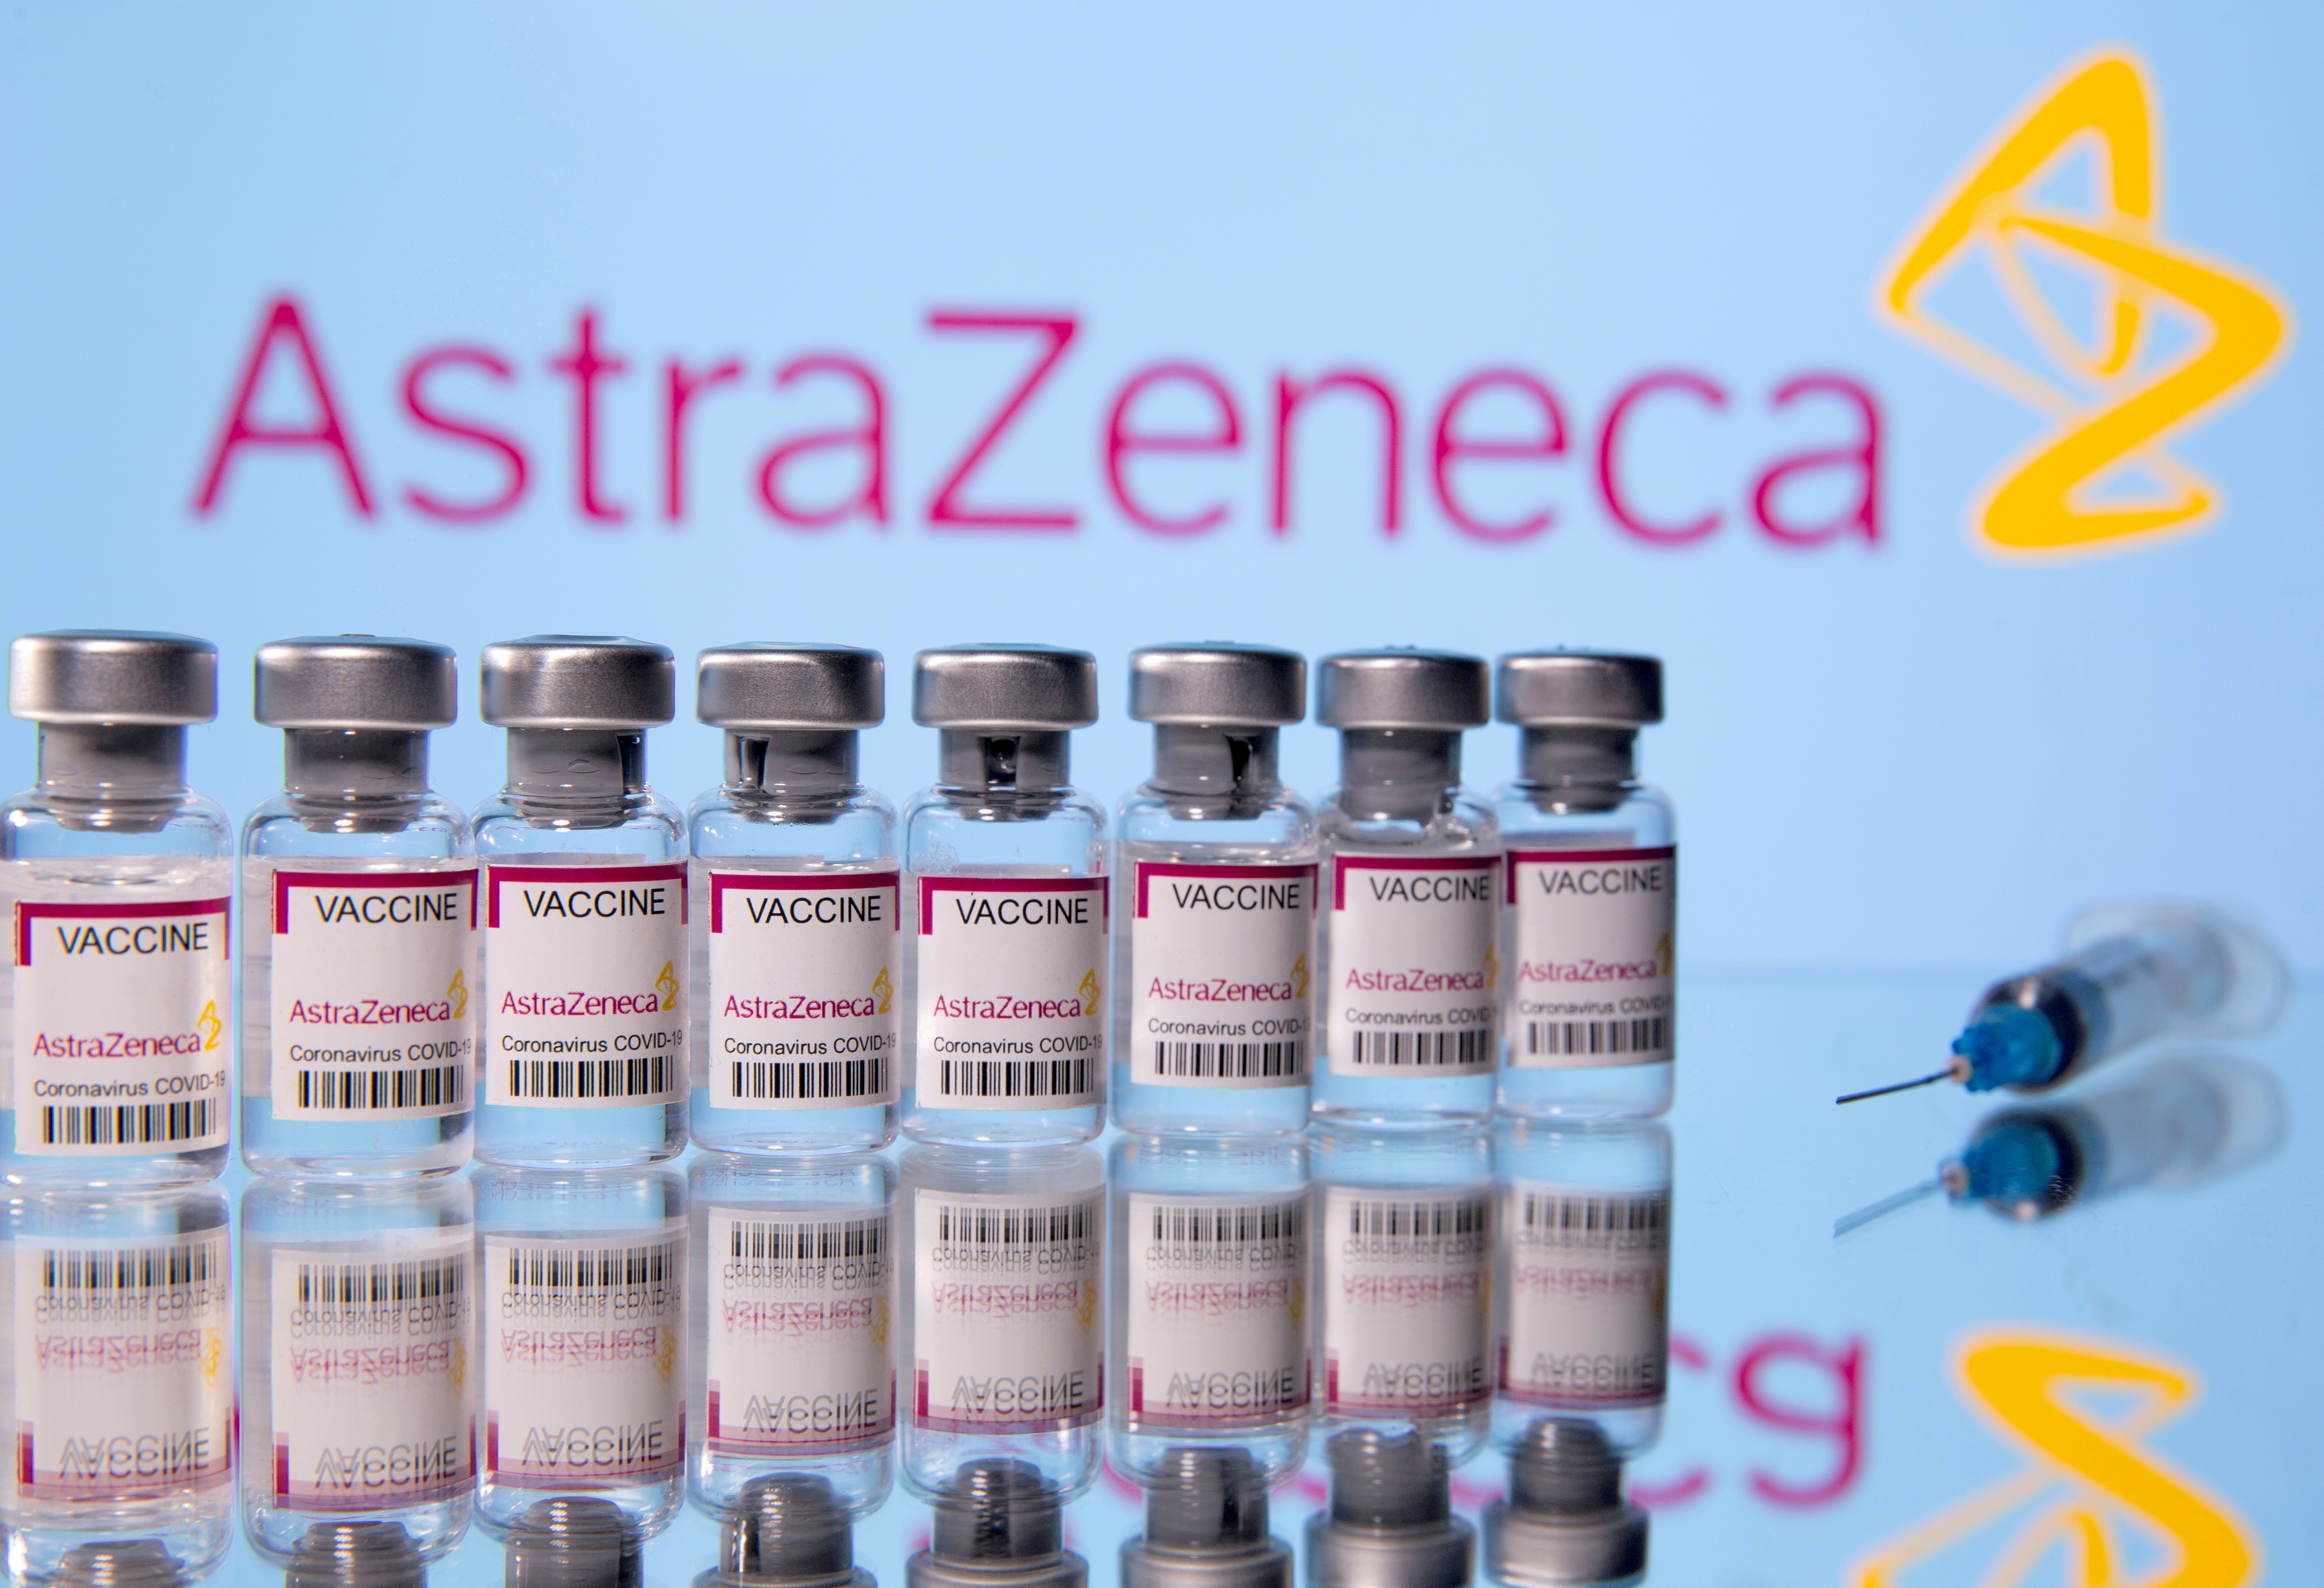 Vials labelled 'Astra Zeneca COVID-19 Coronavirus Vaccine' and a syringe are seen in front of a displayed AstraZeneca logo in this illustration photo